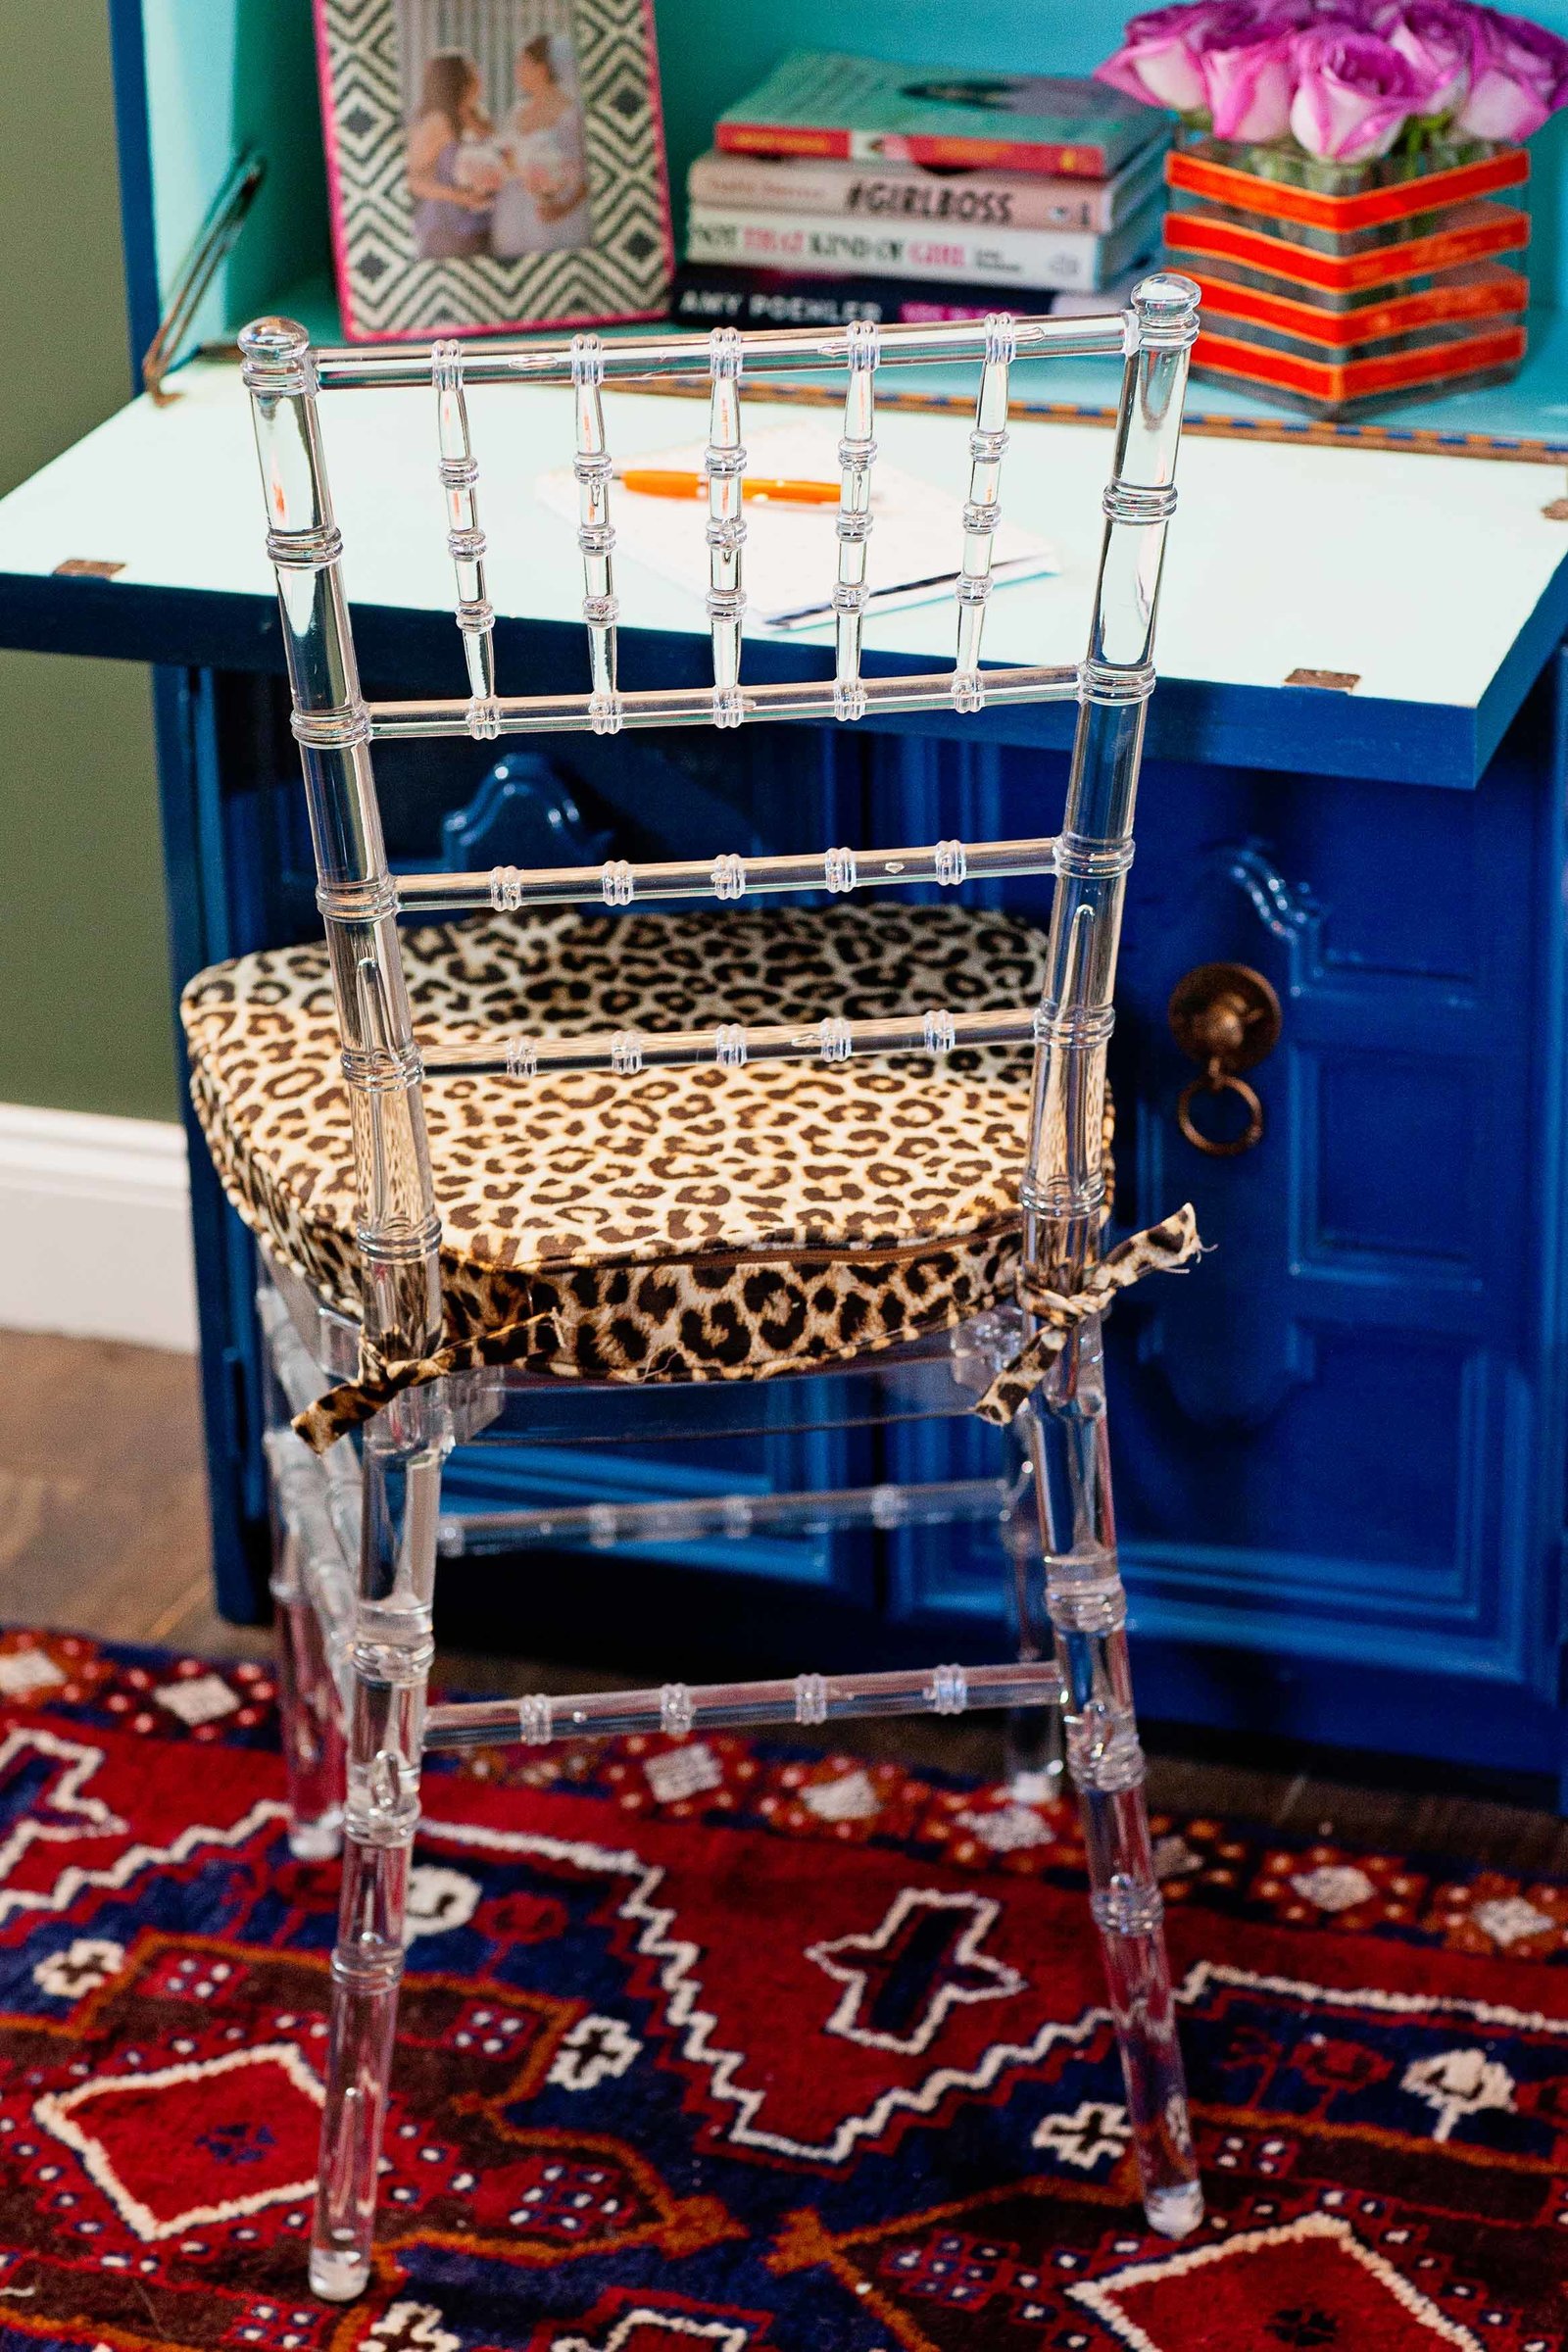 A blue writing desk with a clear acrylic chair and leopard print cushion.